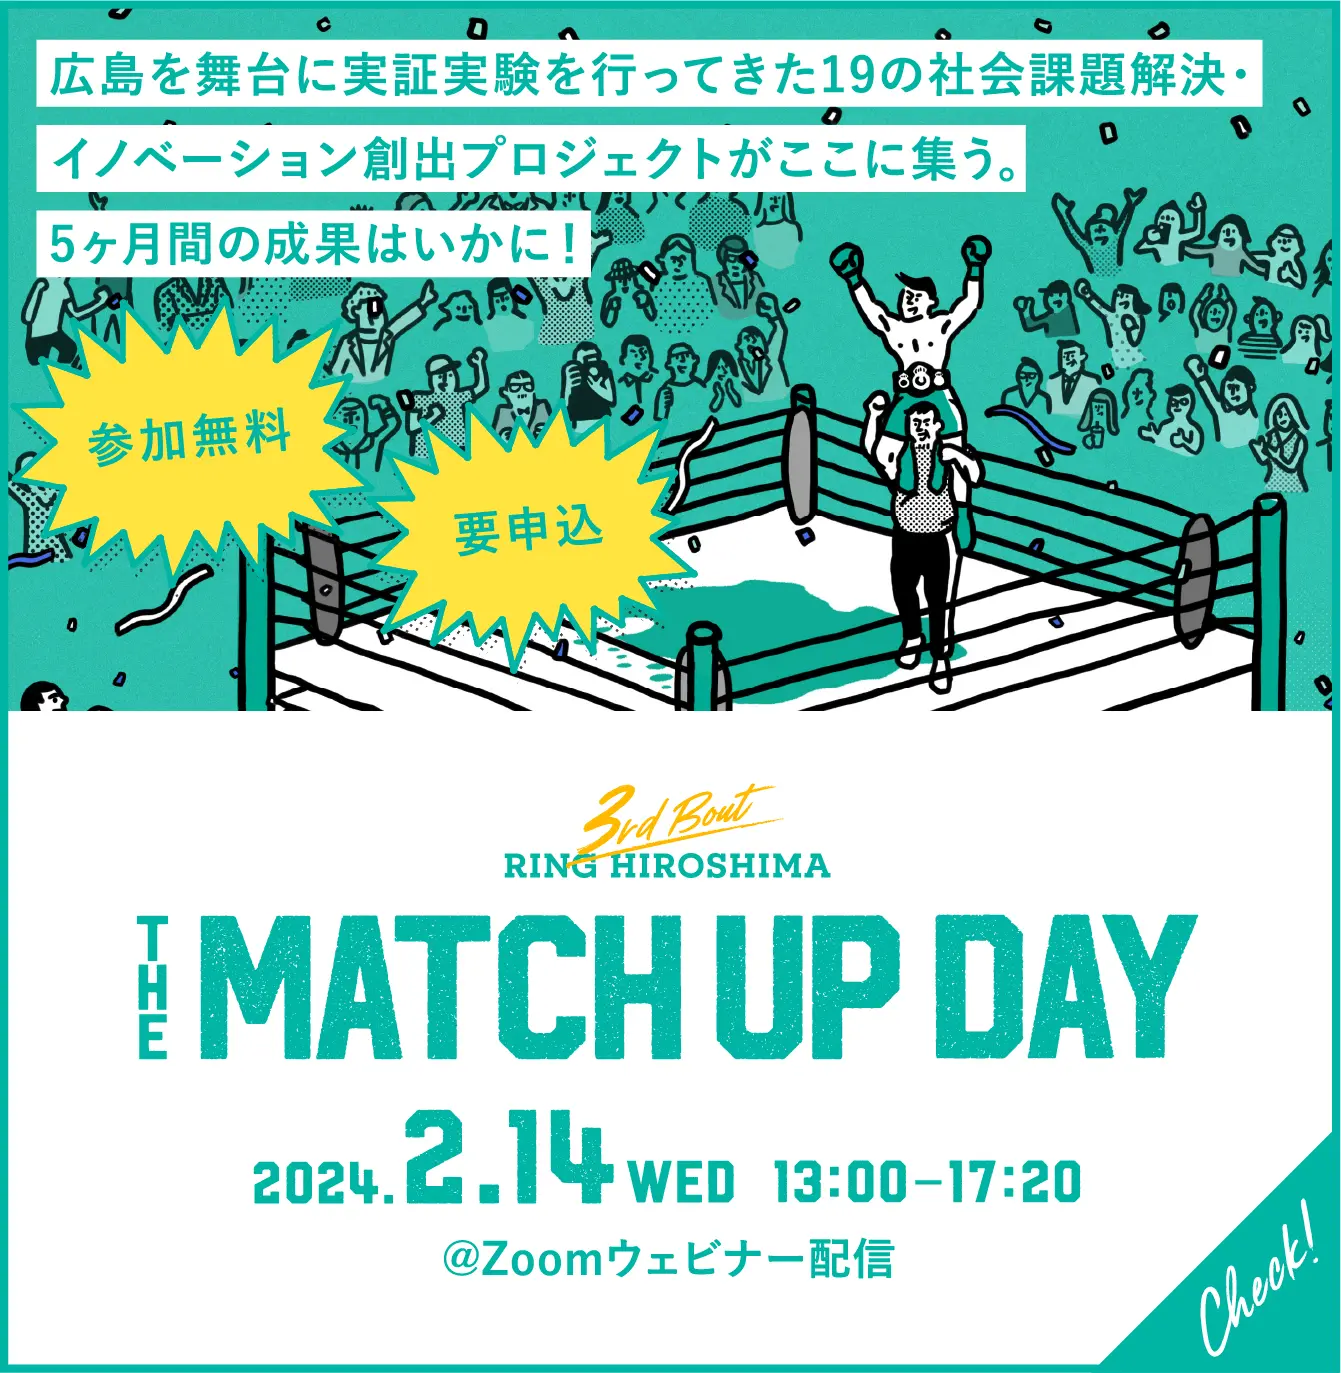 MATCHUP DAY 2023年2月16日（木）13:00〜16:20